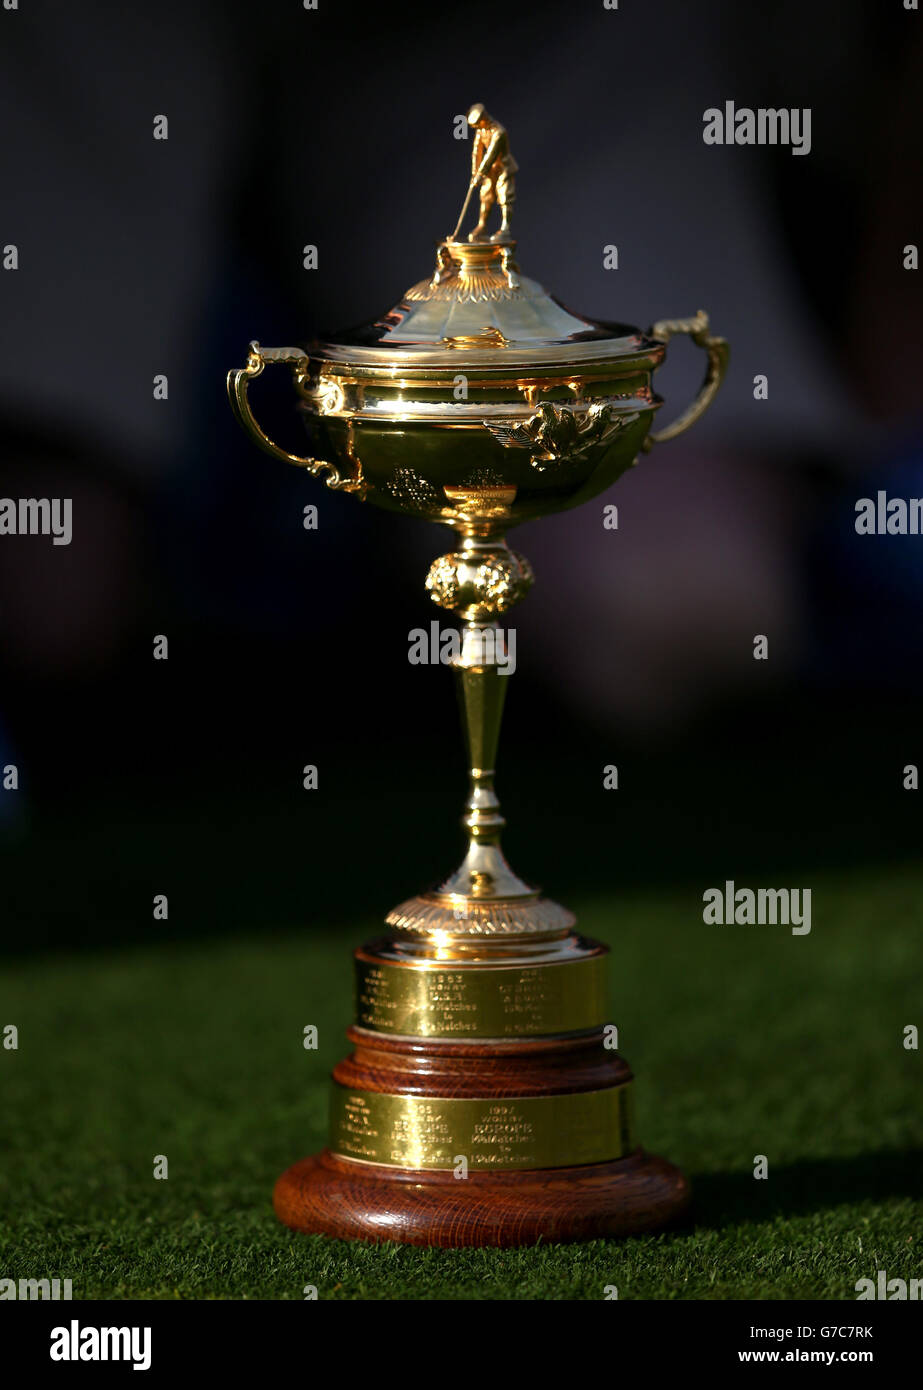 Golf - 40th Ryder Cup - Practice Day One - Gleneagles Stock Photo